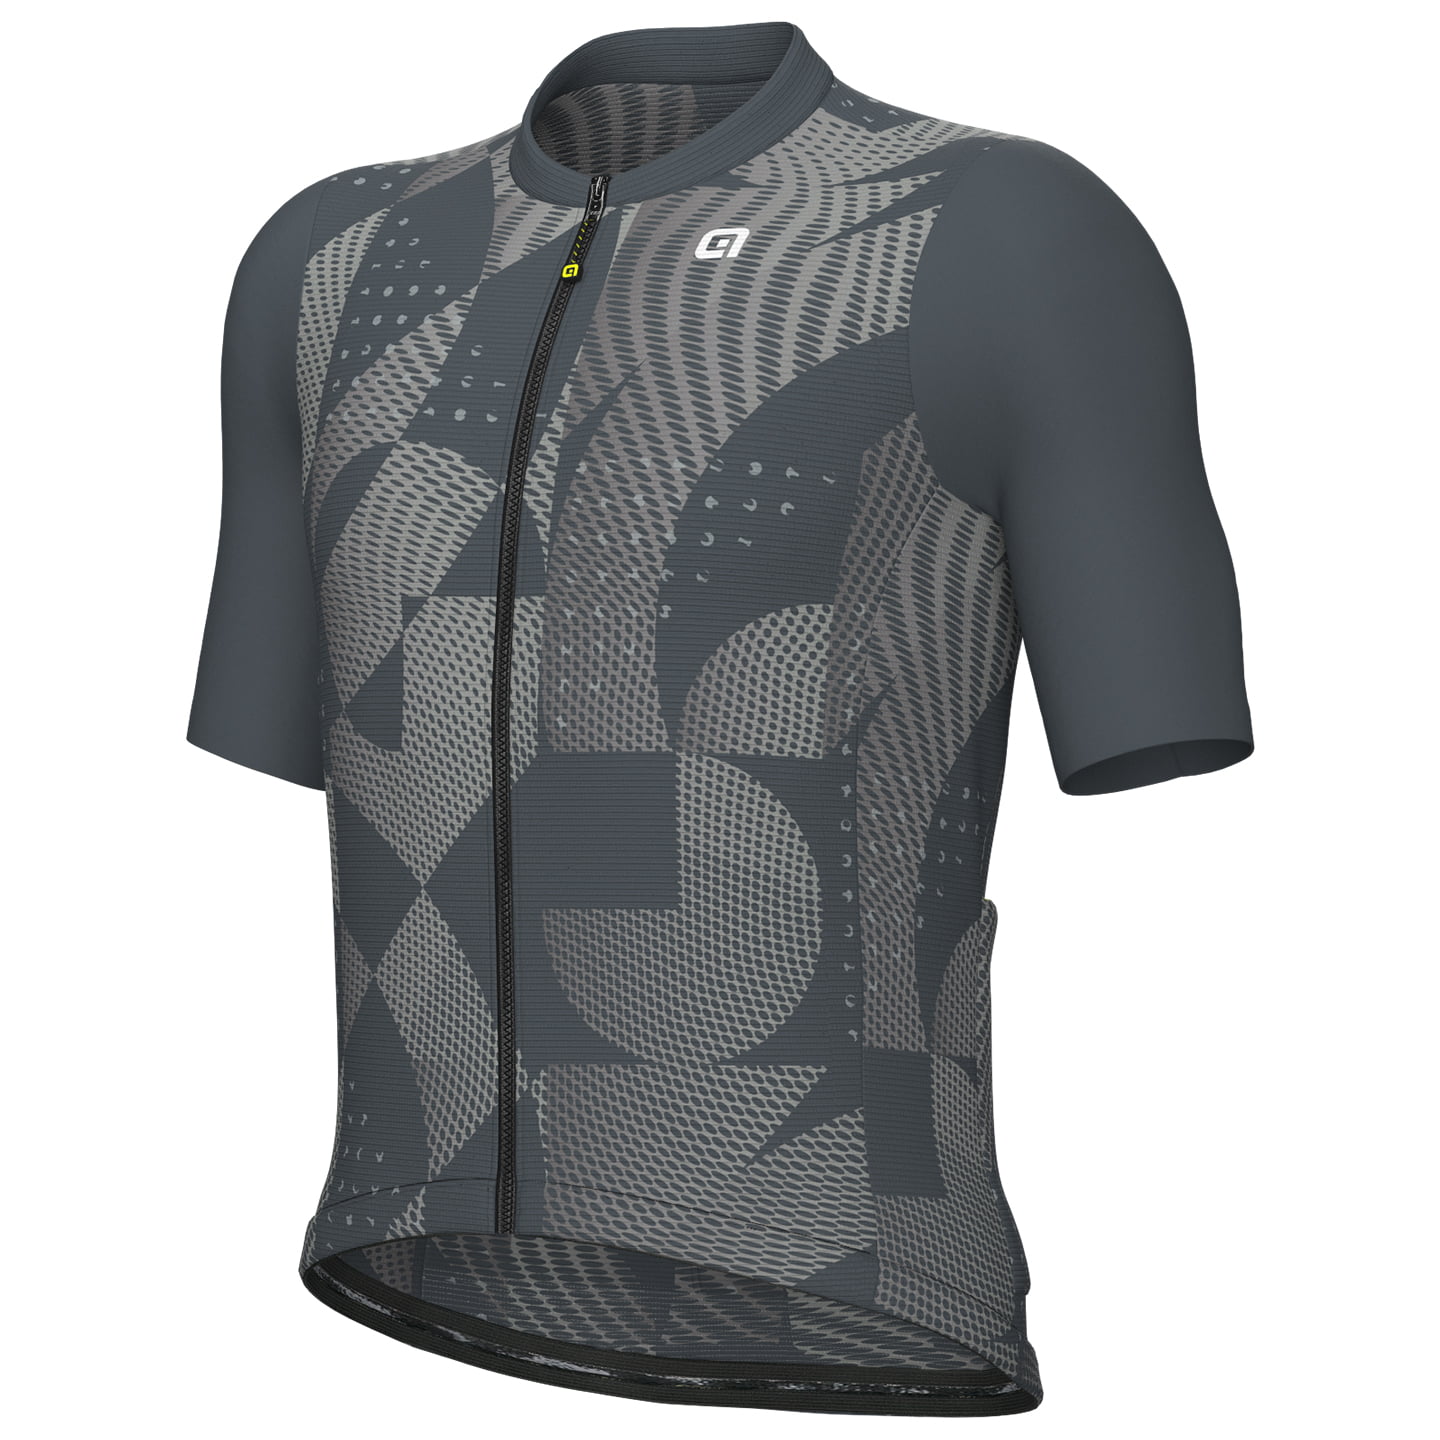 ALE Enjoy Short Sleeve Jersey, for men, size M, Cycling jersey, Cycling clothing